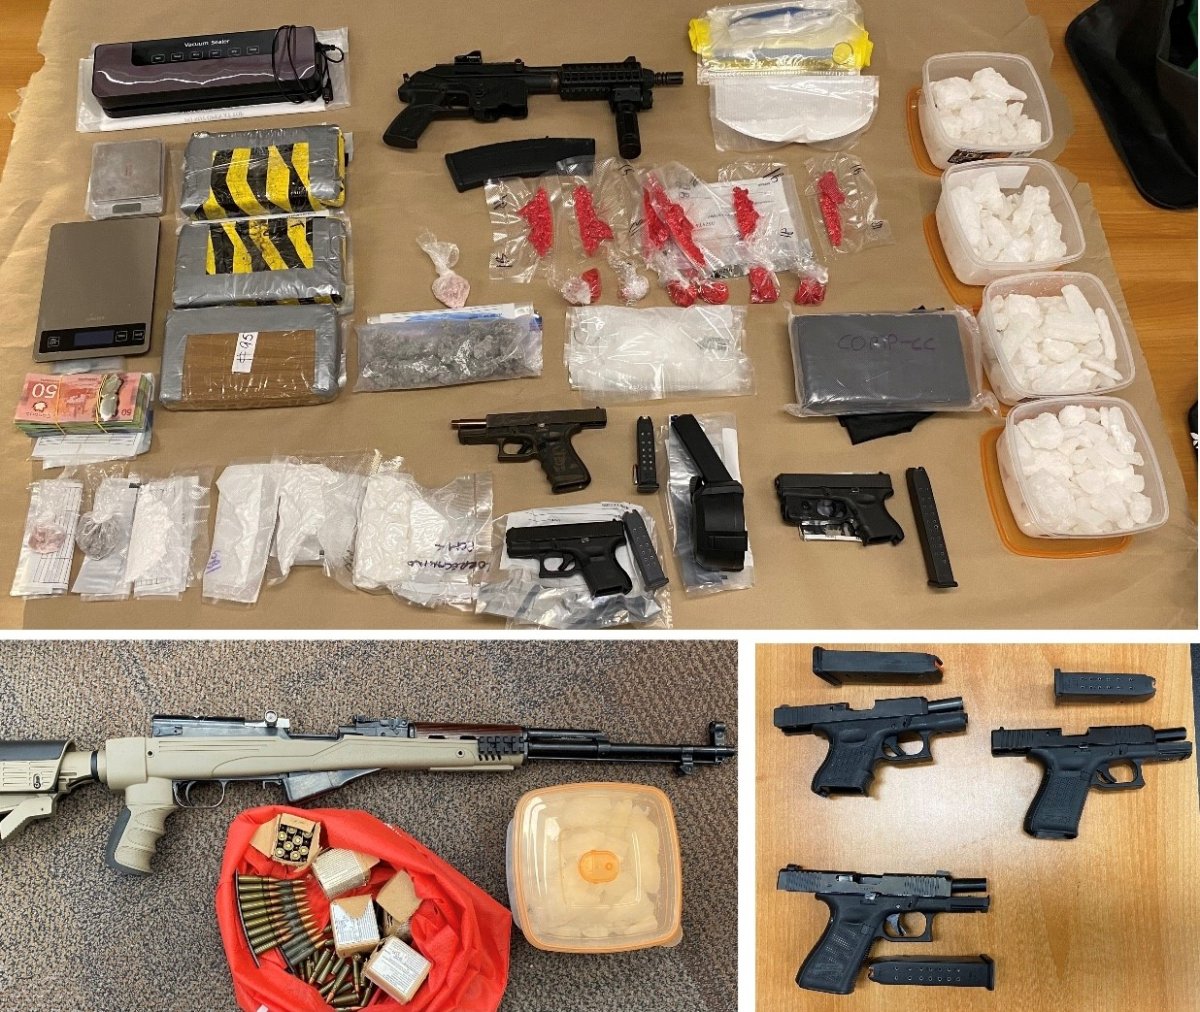 Guelph police say over $5 million in drugs and firearms was seized following a four-month trafficking investigation. Three people were arrested on Wednesday.